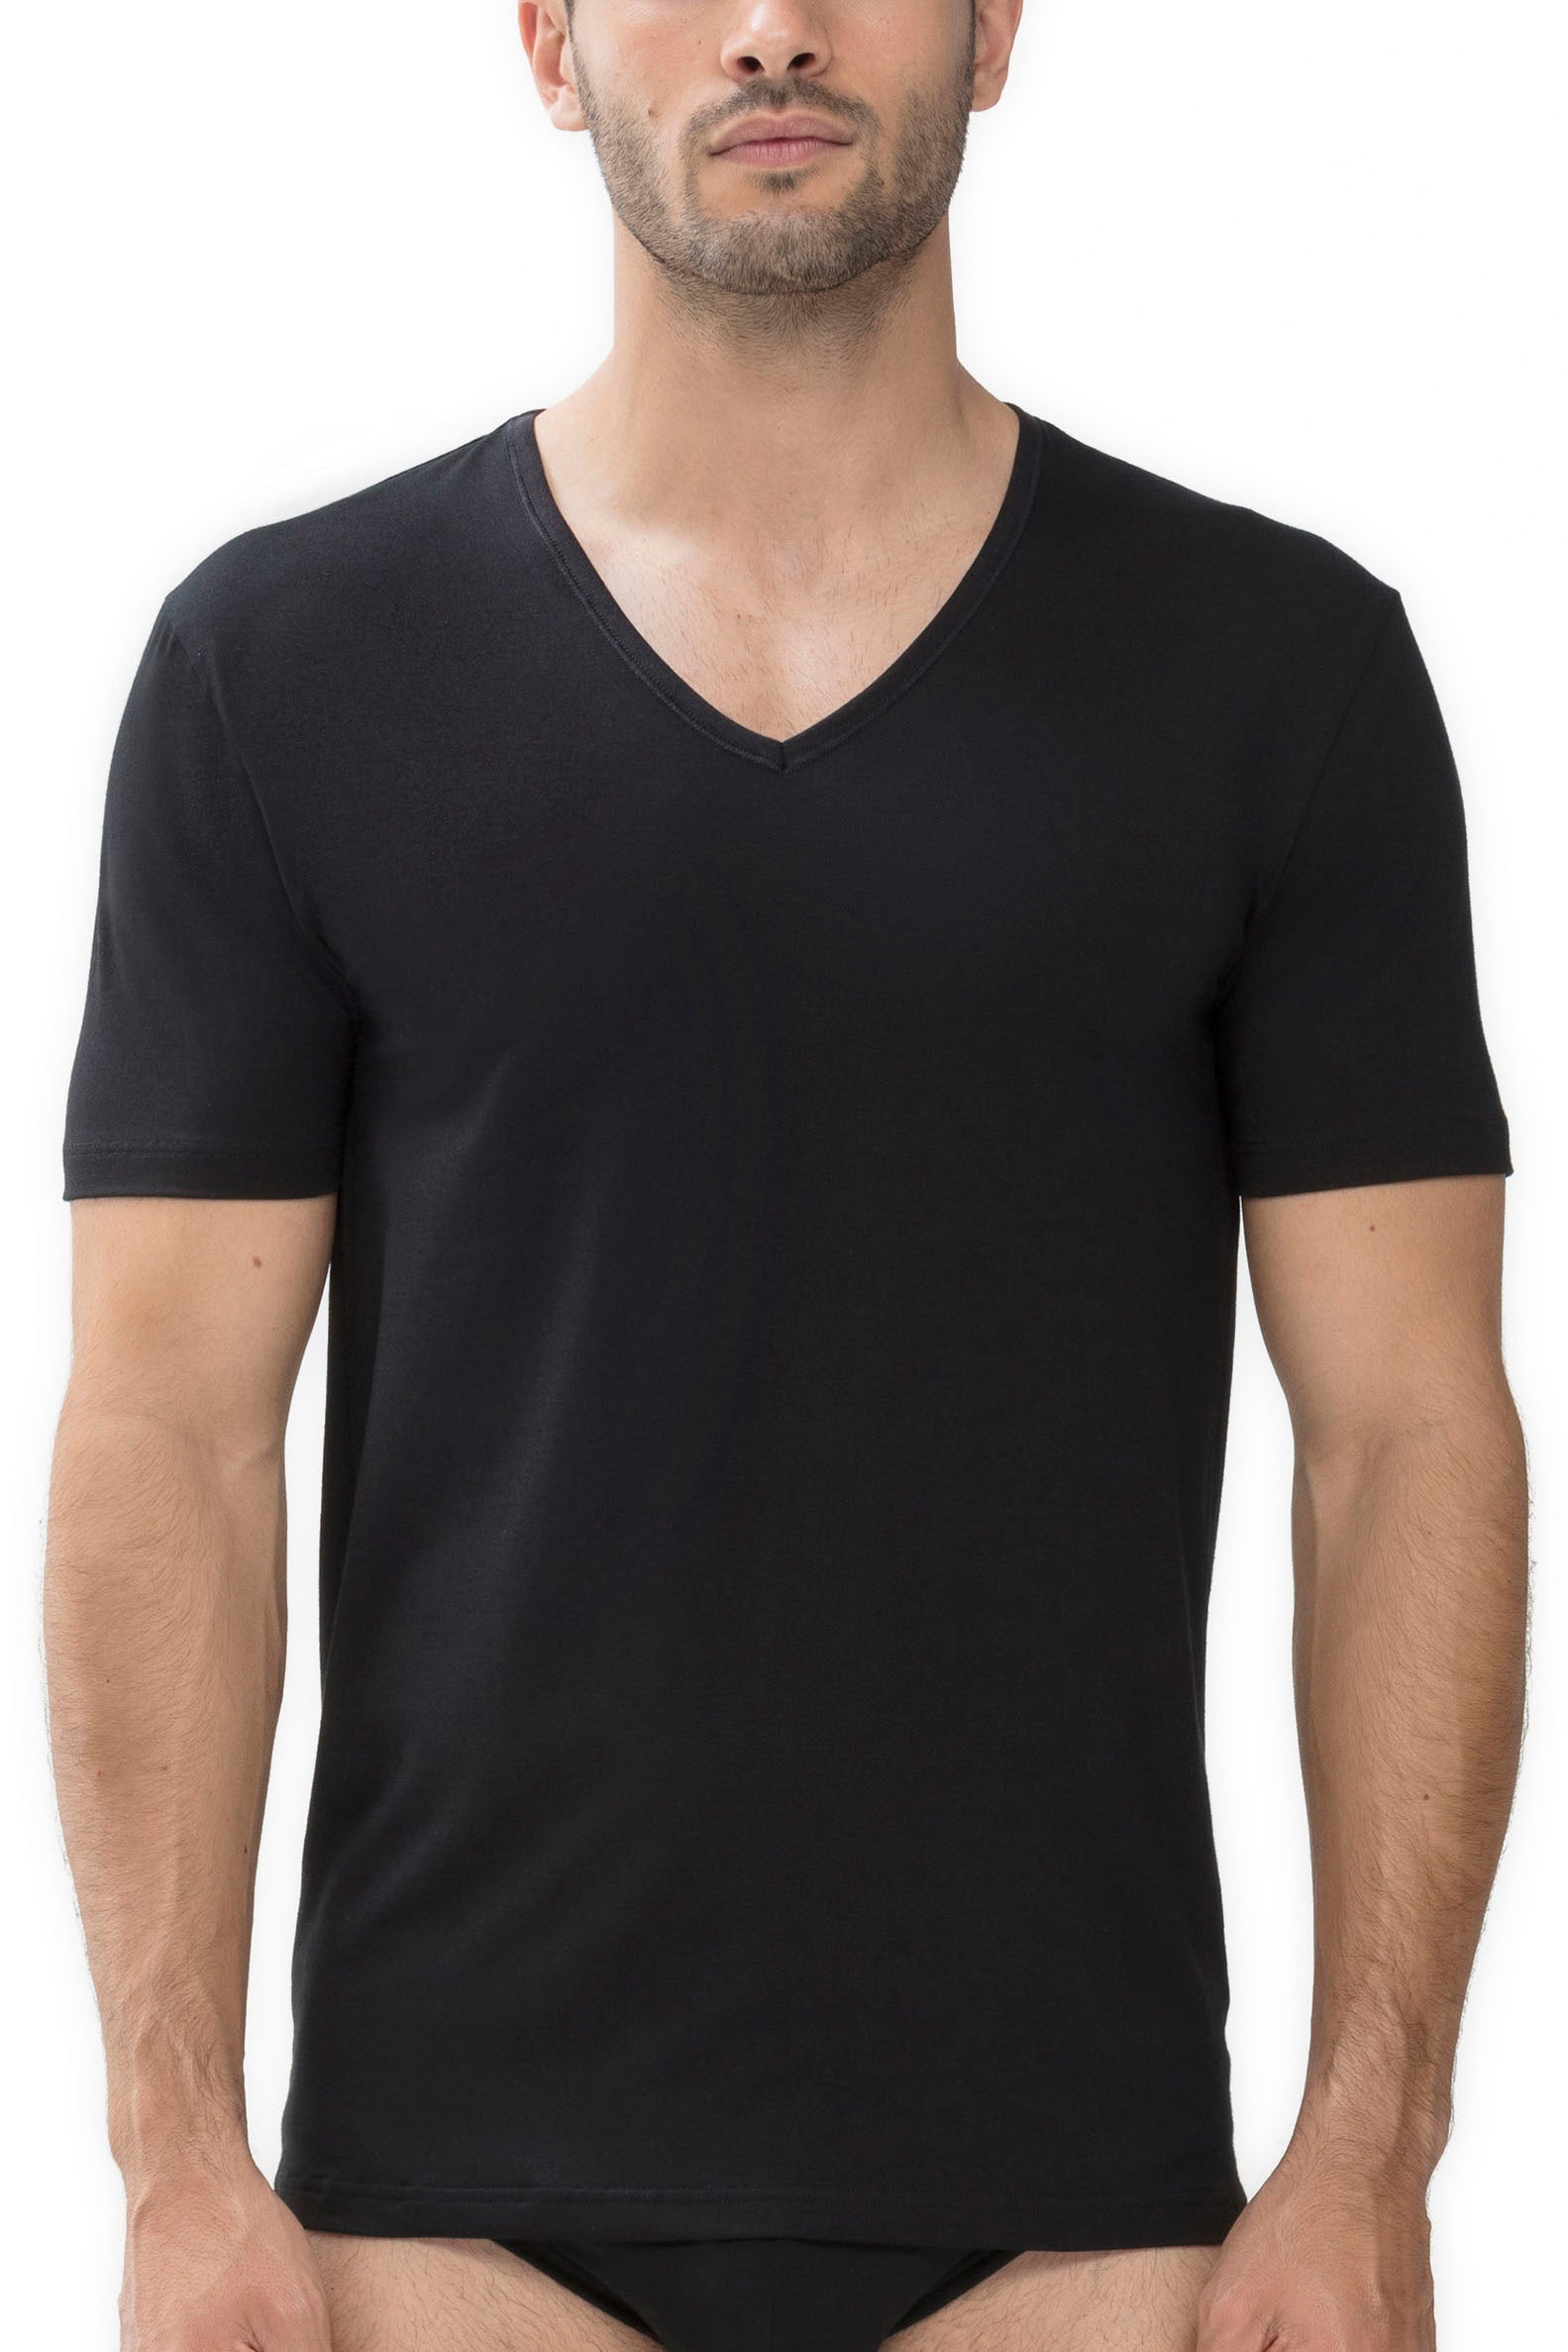 Mey Serie Dry Cotton (B) V-neck BLACK buy for the best price CAD$ 62.00 -  Canada and U.S. delivery – Bralissimo